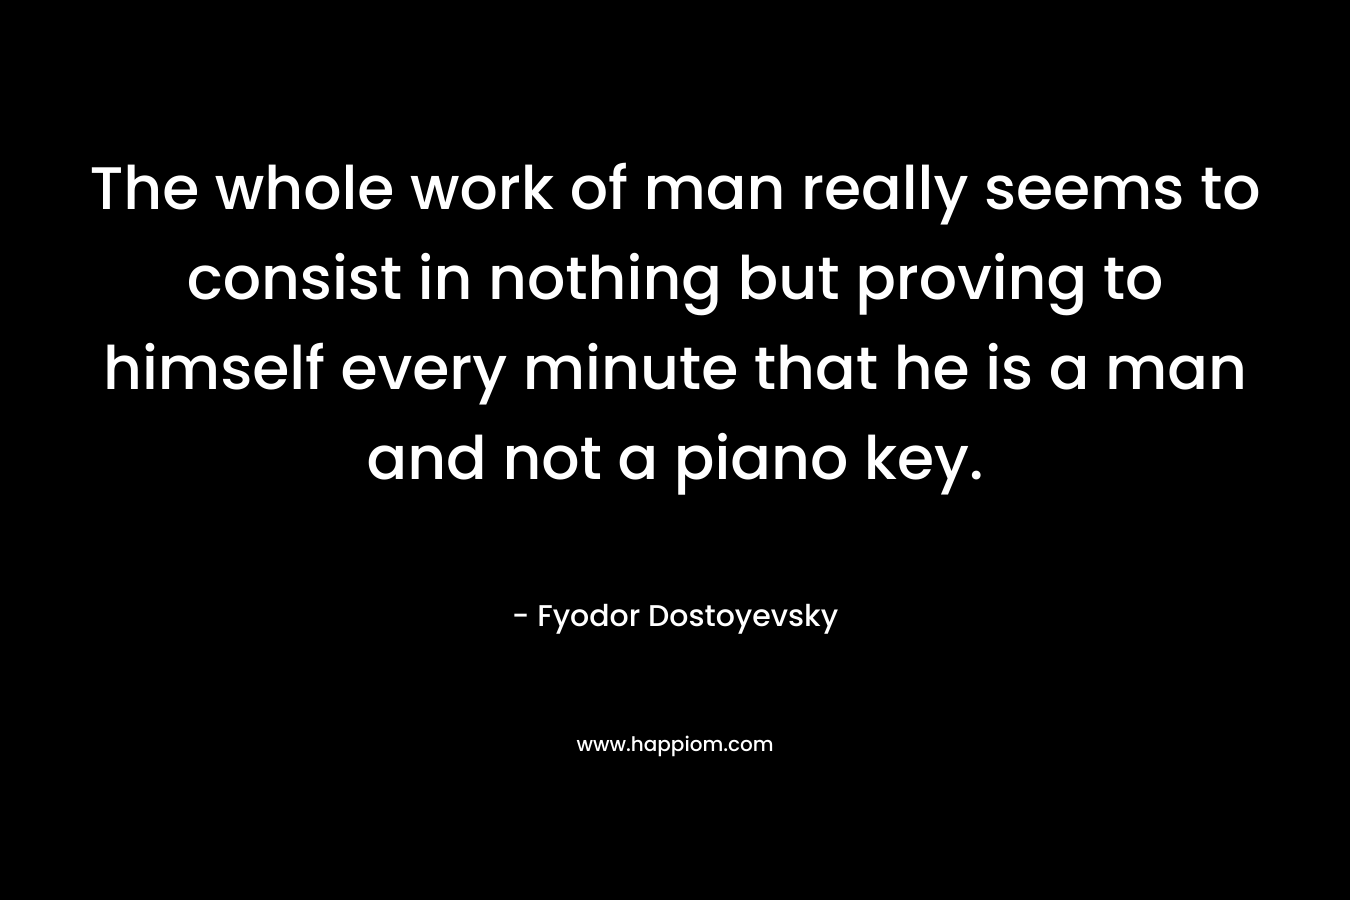 The whole work of man really seems to consist in nothing but proving to himself every minute that he is a man and not a piano key.